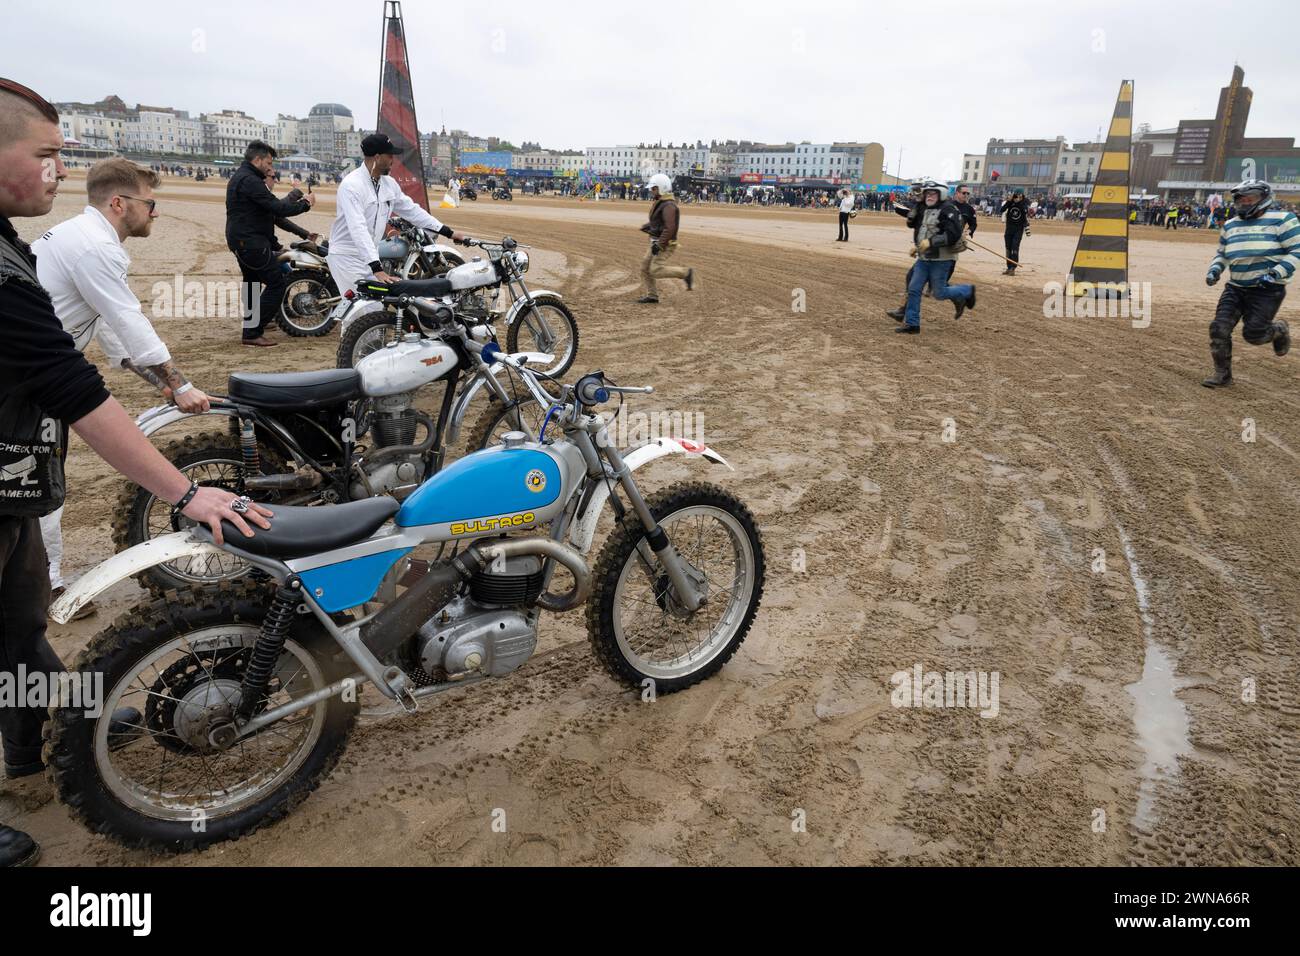 14/03/23   Competitors take part in the Malle Mile Beach Race on Margate beach, Kent. More than 250 riders took to the sands to race a selection of cu Stock Photo